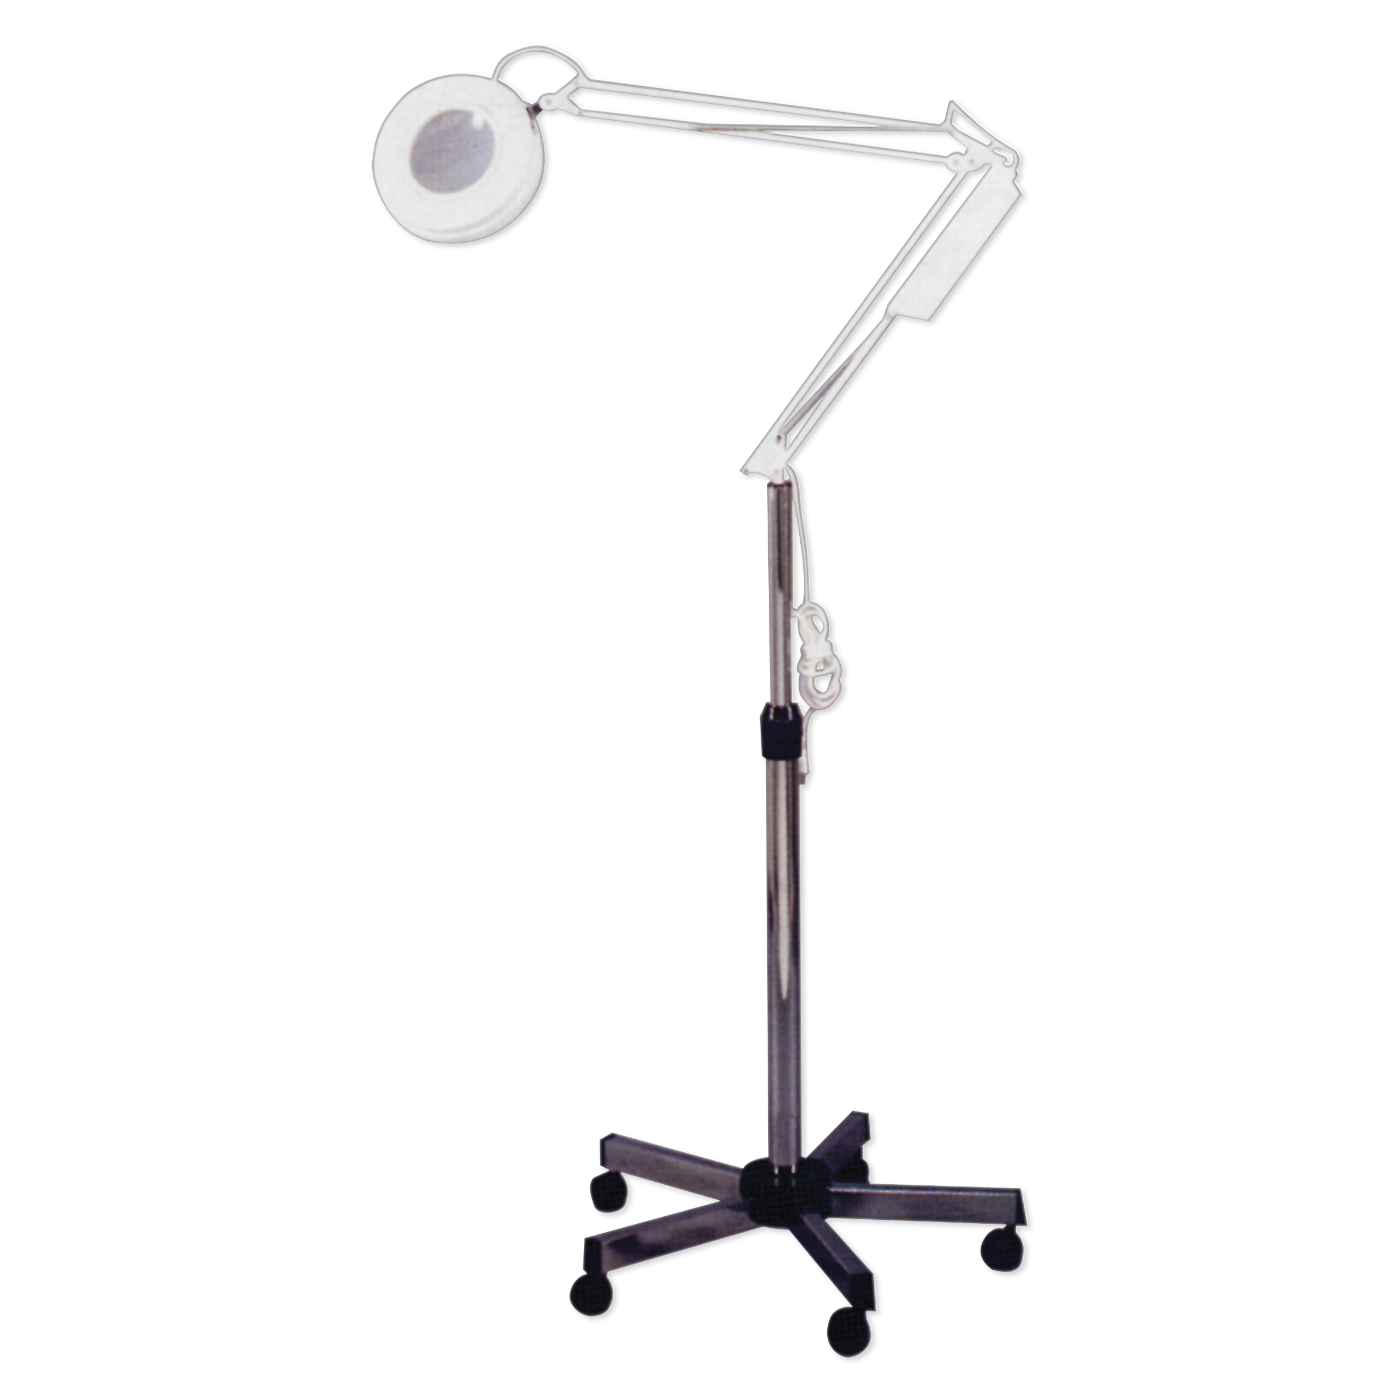 5-Diopter Magnifying Lamp - Caster Base